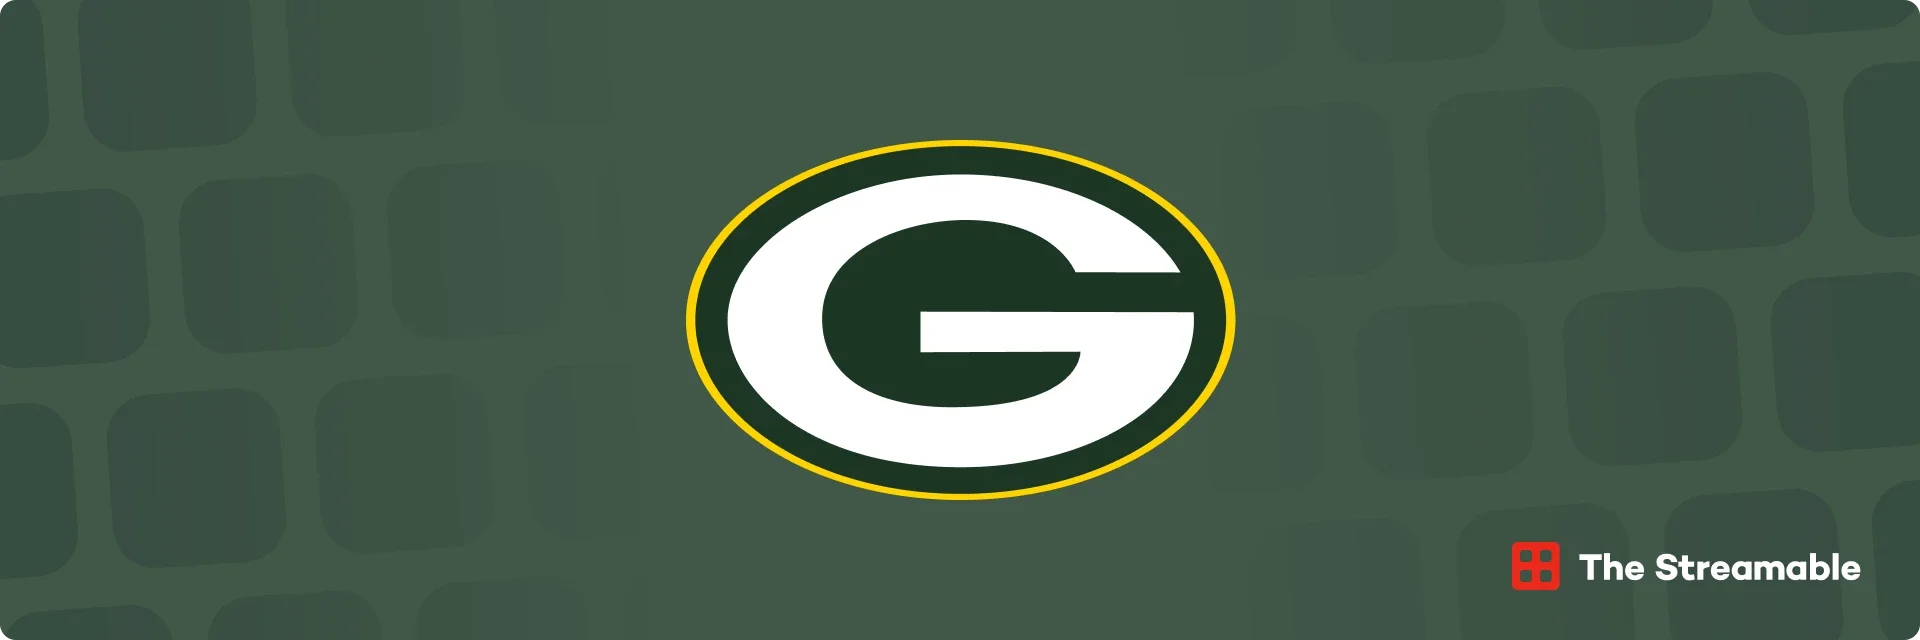 How to Watch Green Bay Packers Games Online Live Without Cable